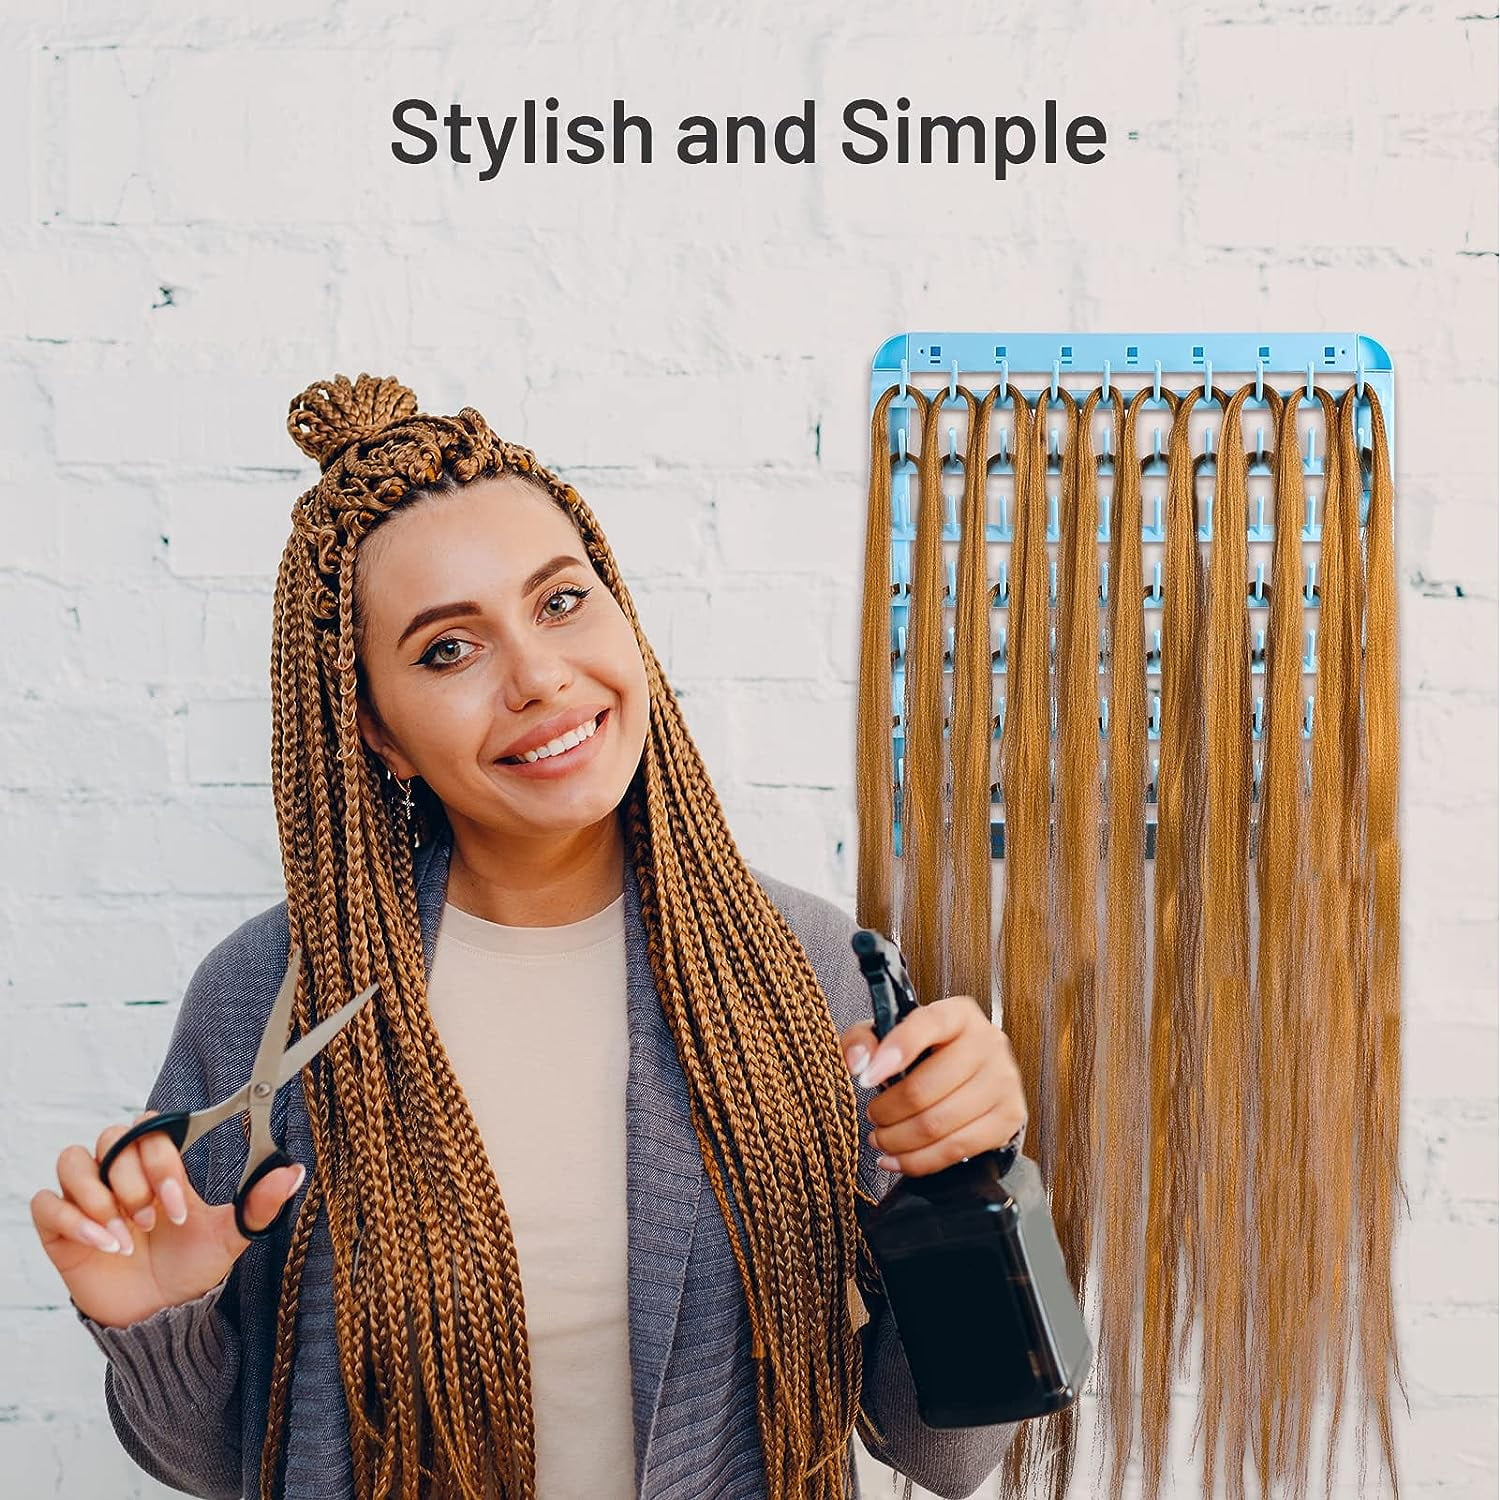 Portable Braiding Hair Rack 120 Pegs, 2-in-1 Standing Hair Holder Braid  Rack for Braiding Hair, Double Sided Hair Separator Stand for Stylists,  Hair